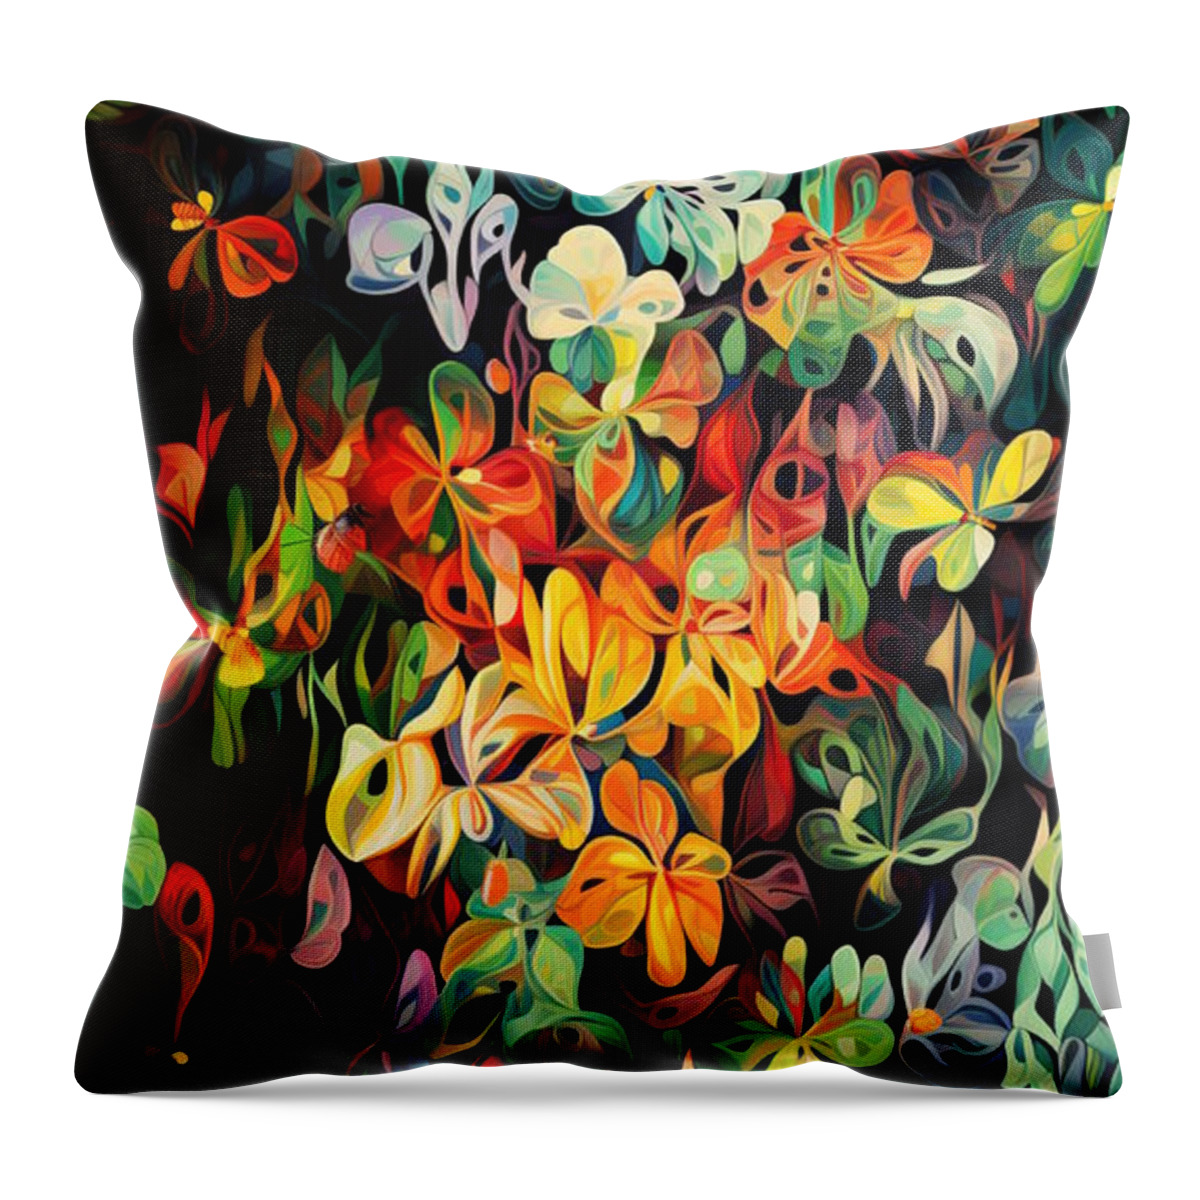  Throw Pillow featuring the digital art Case No 5 by Mark Slauter